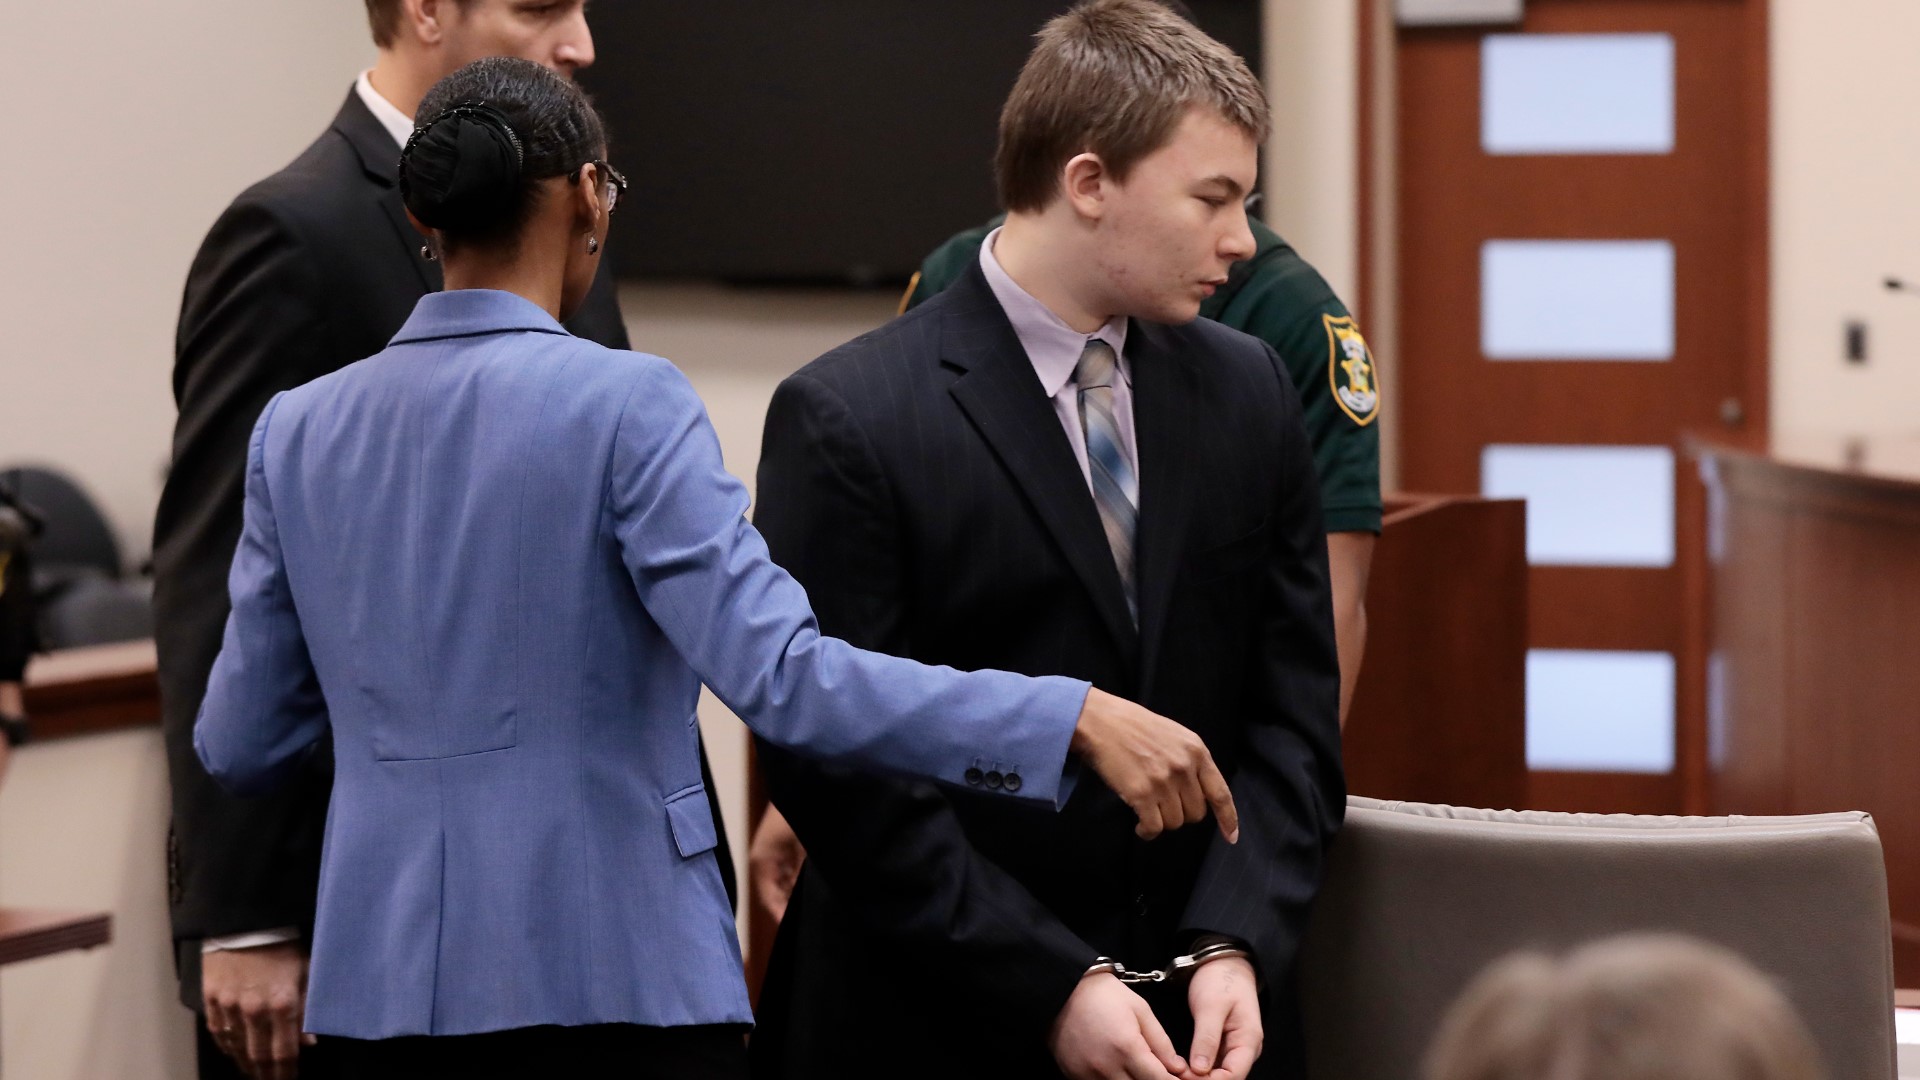 Aiden Fucci, 16, pleaded guilty Monday to the May 2021 killing of his 13-year-old classmate Tristyn Bailey. Police say Fucci stabbed her more than 114 times.